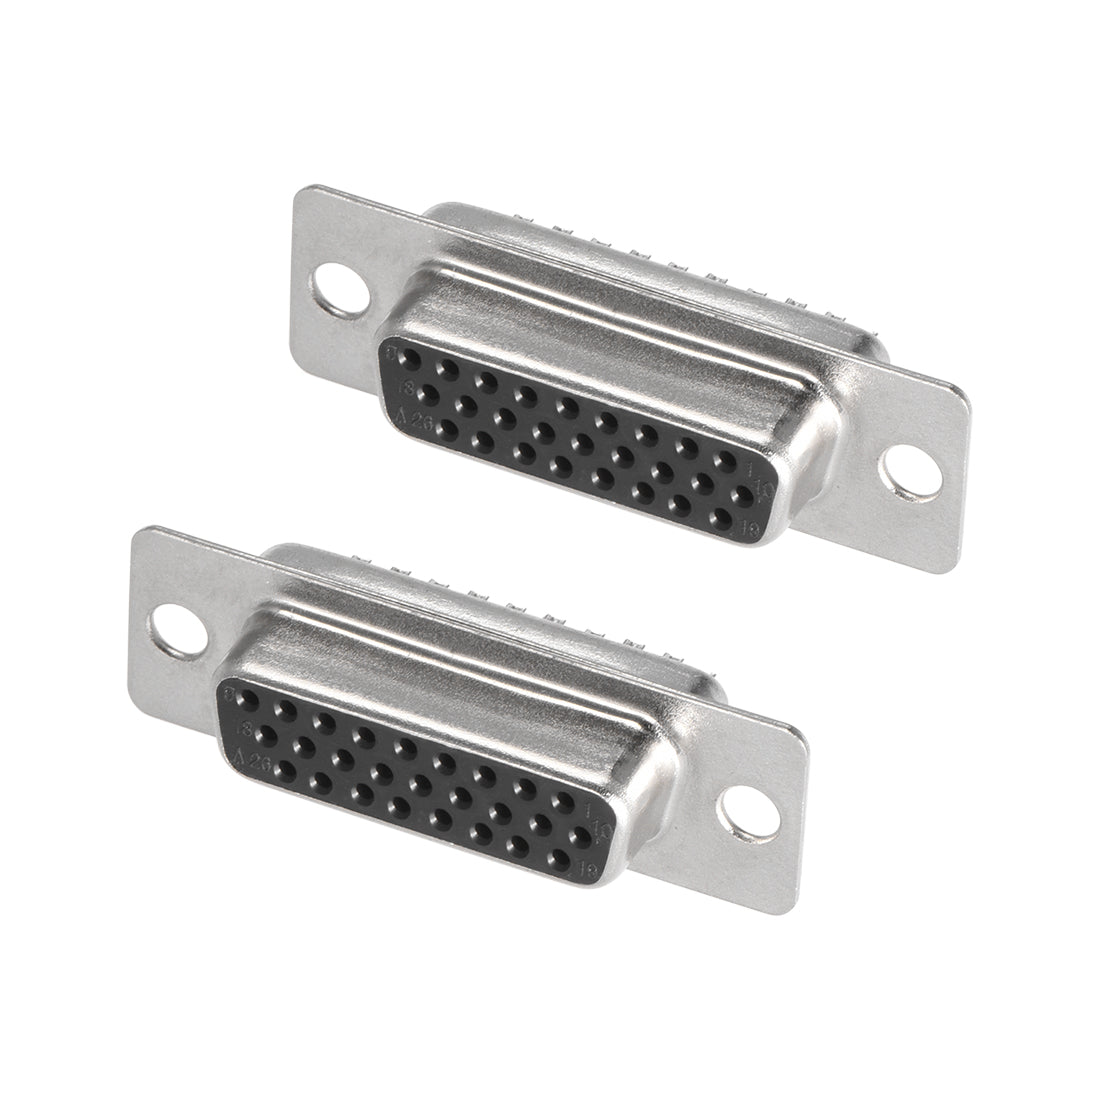 uxcell Uxcell D-sub Connector DB26 Female Socket 26-pin 3-row Port Terminal Breakout for Mechanical Equipment CNC Computers 2pcs